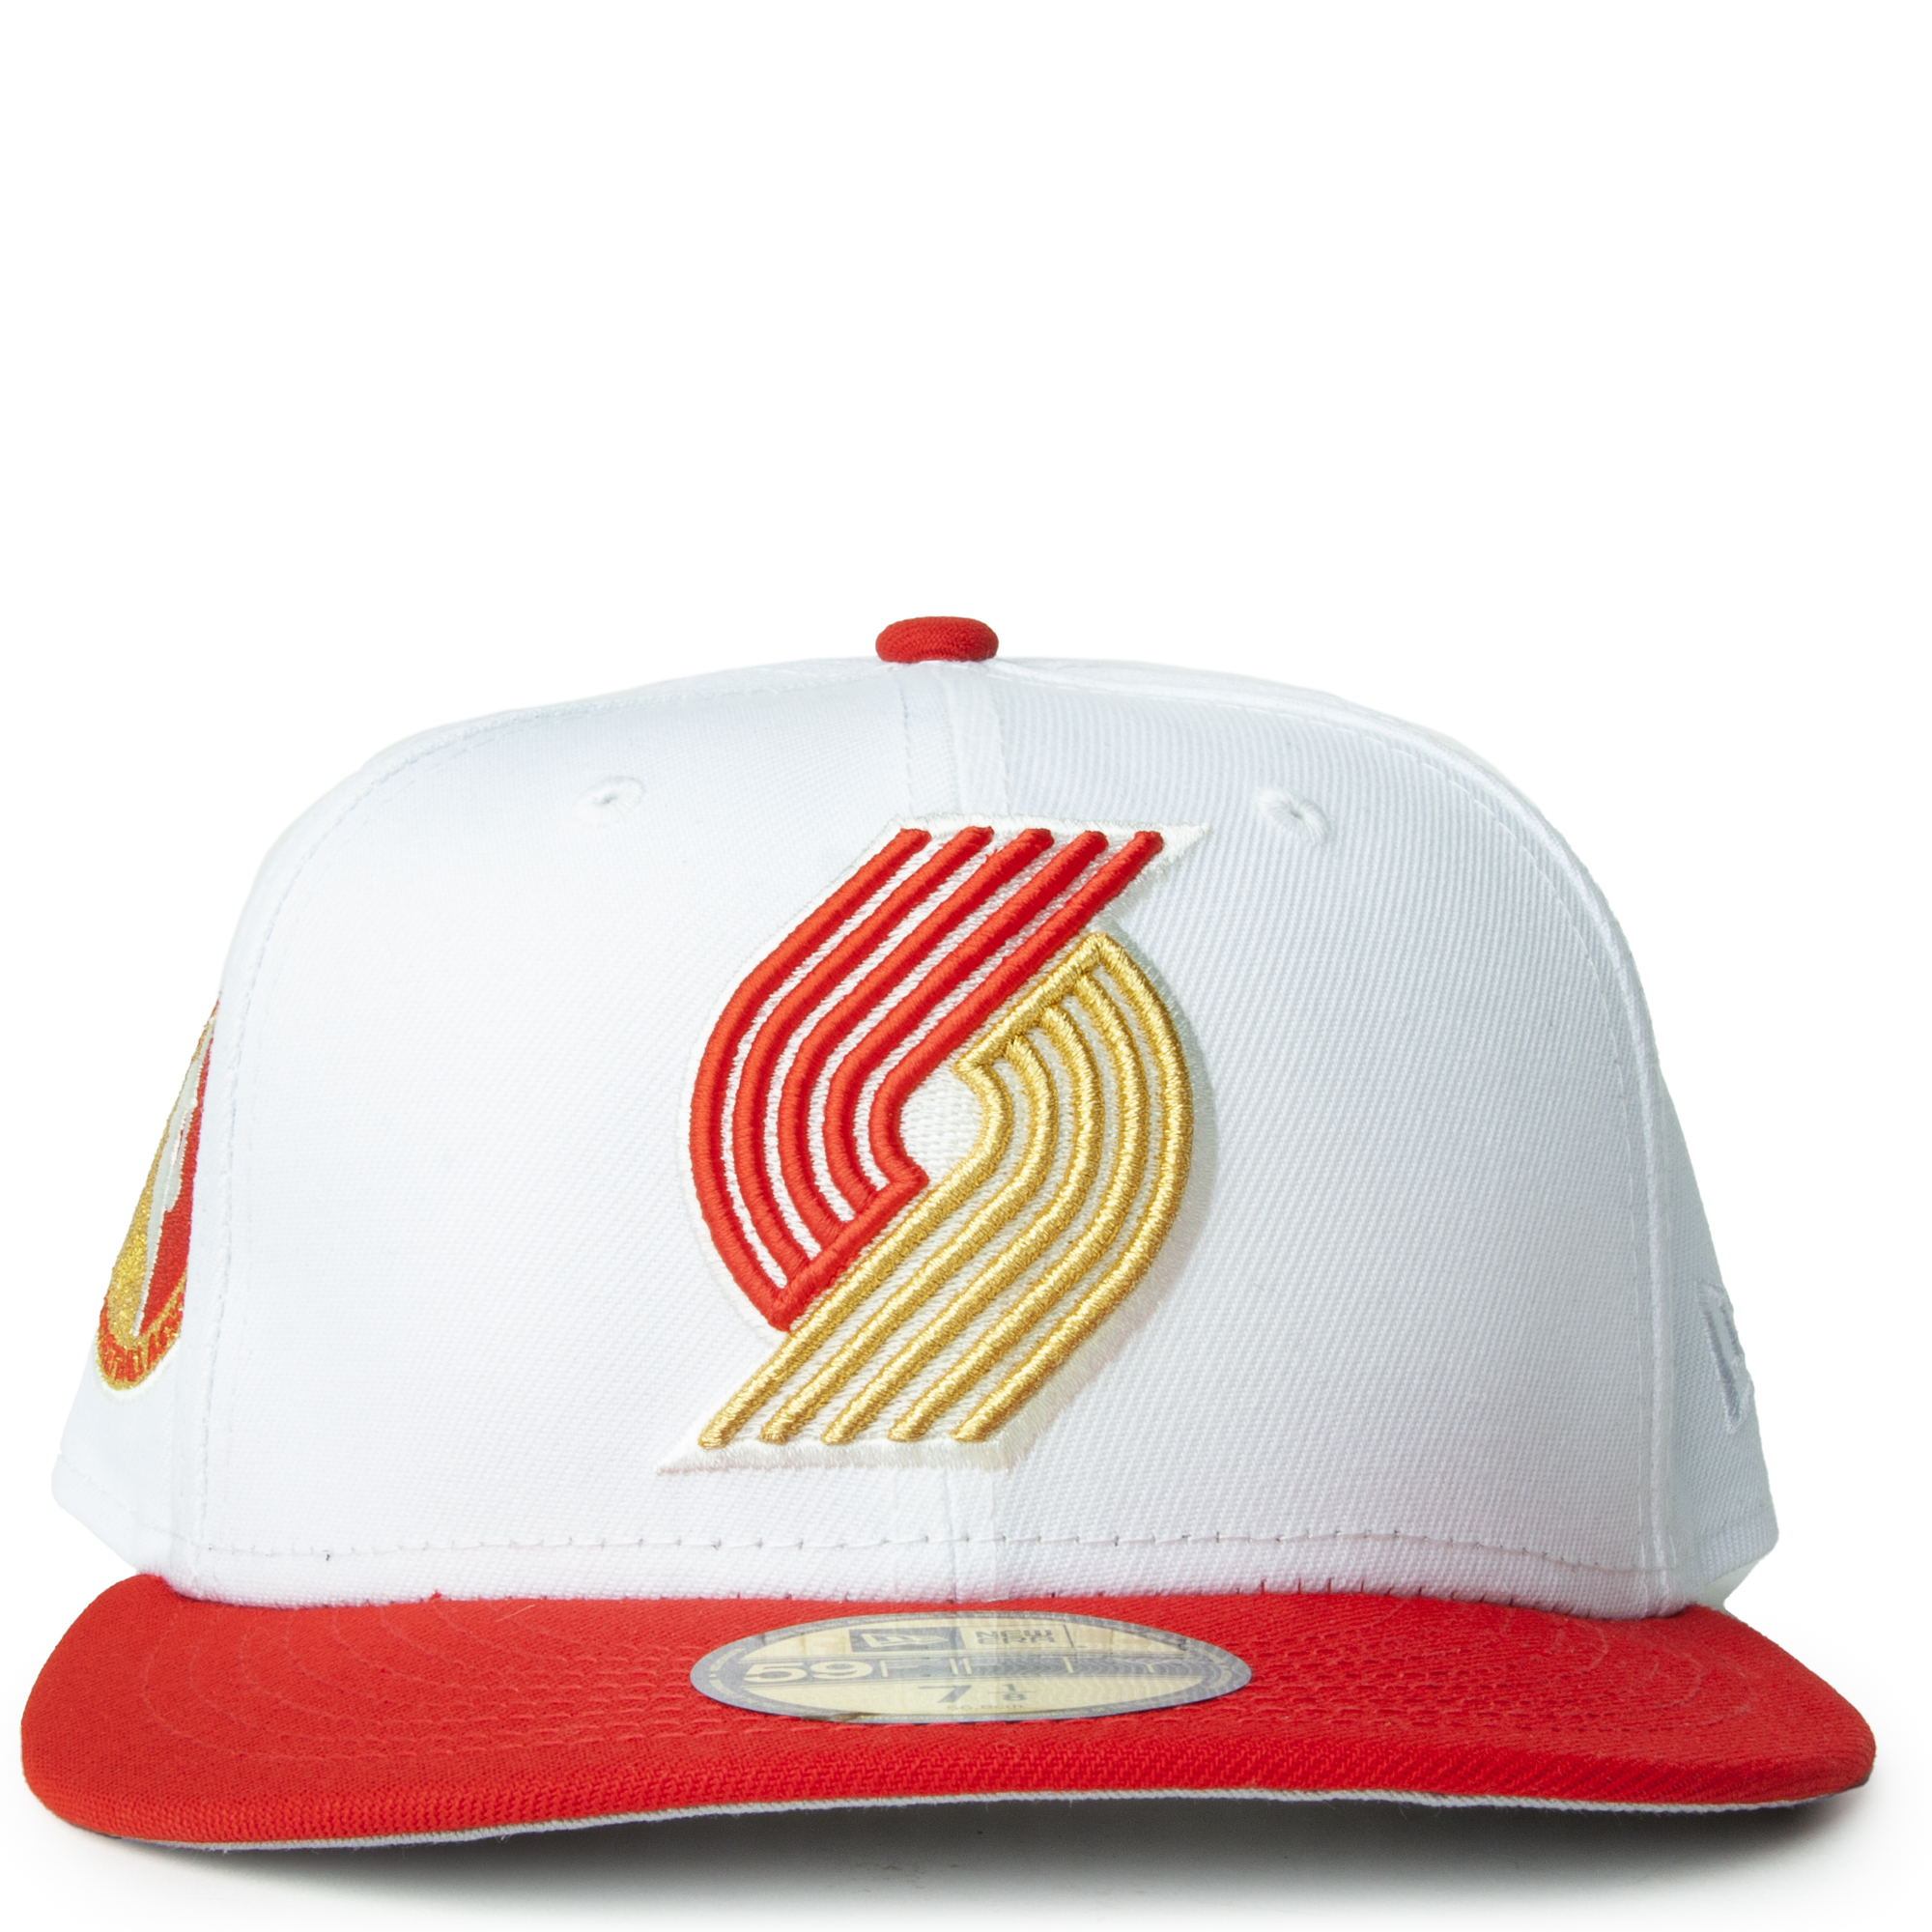 Official Portland Trail Blazers Mitchell & Ness Hats, Snapbacks, Fitted Hats,  Beanies